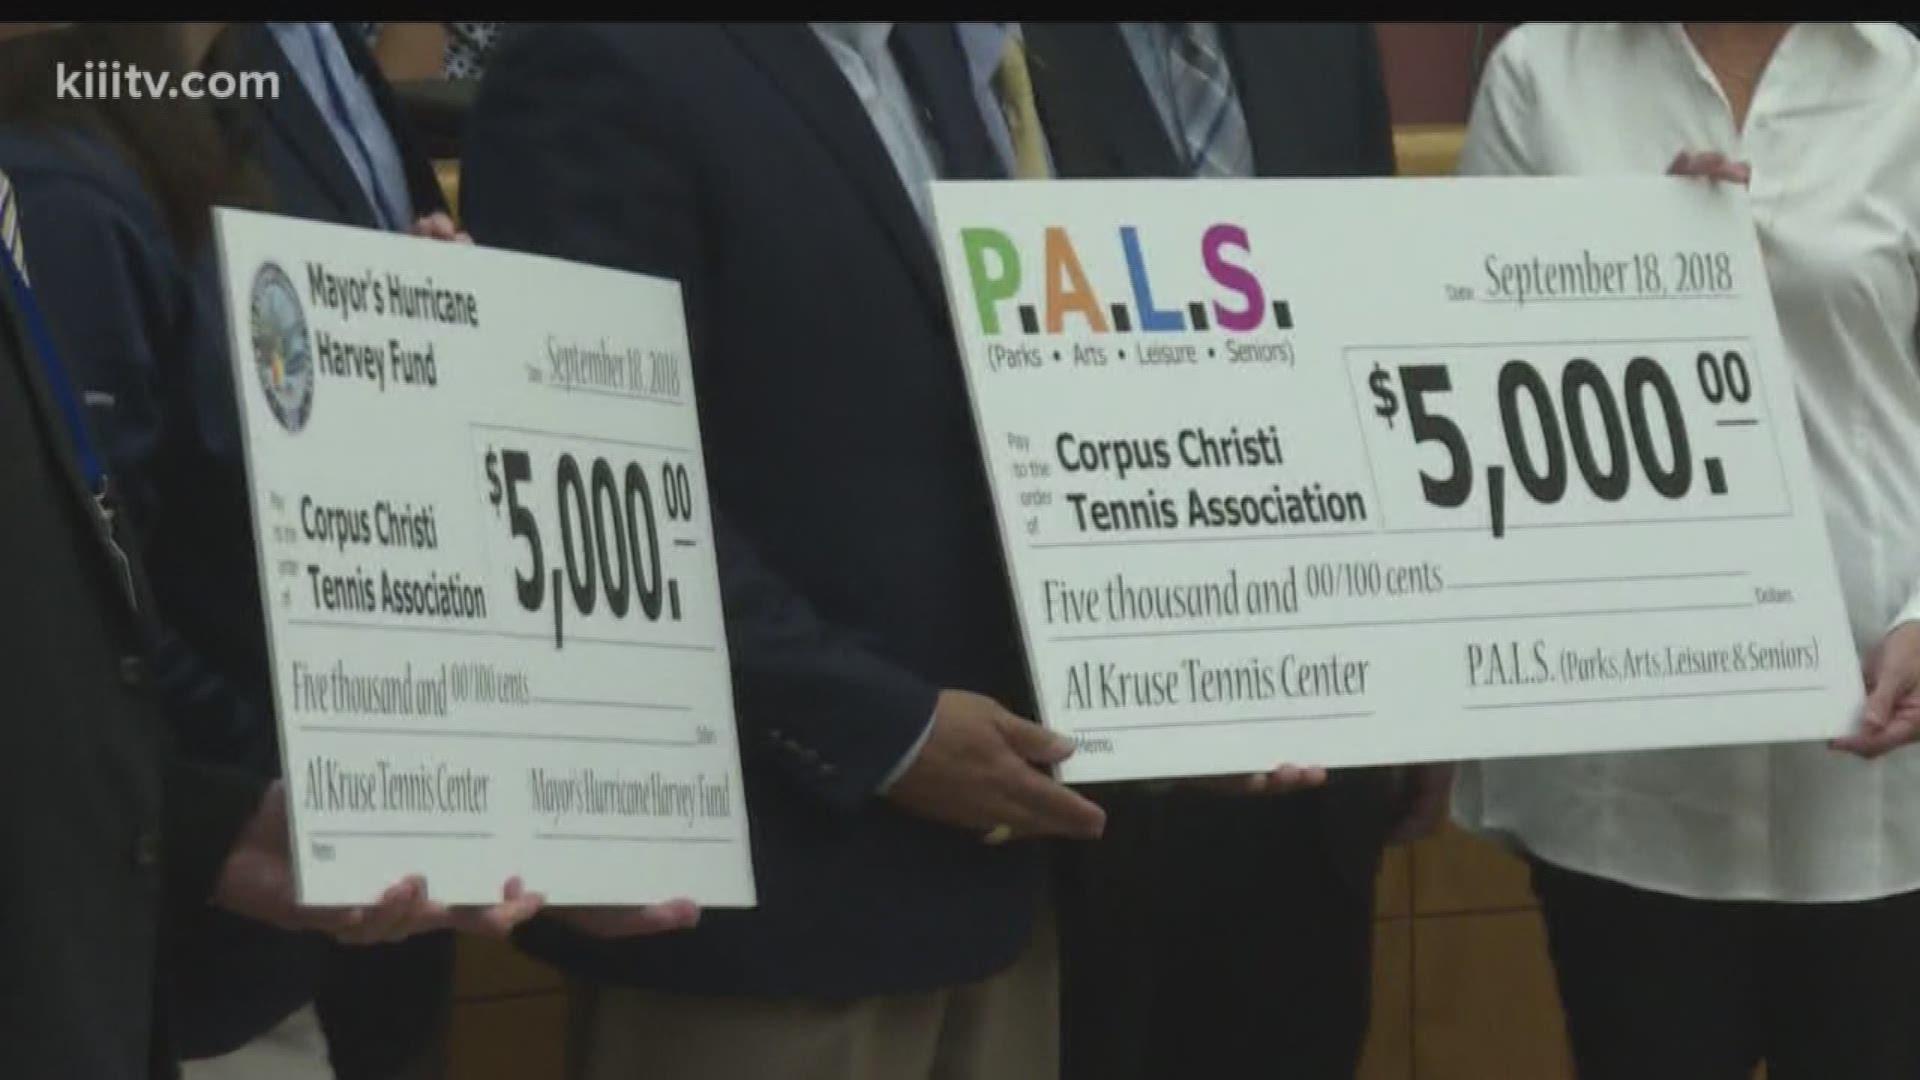 Two $5,000 checks were presented during Tuesday's Corpus Christi City Council meeting to the Al Kruse Tennis Center.